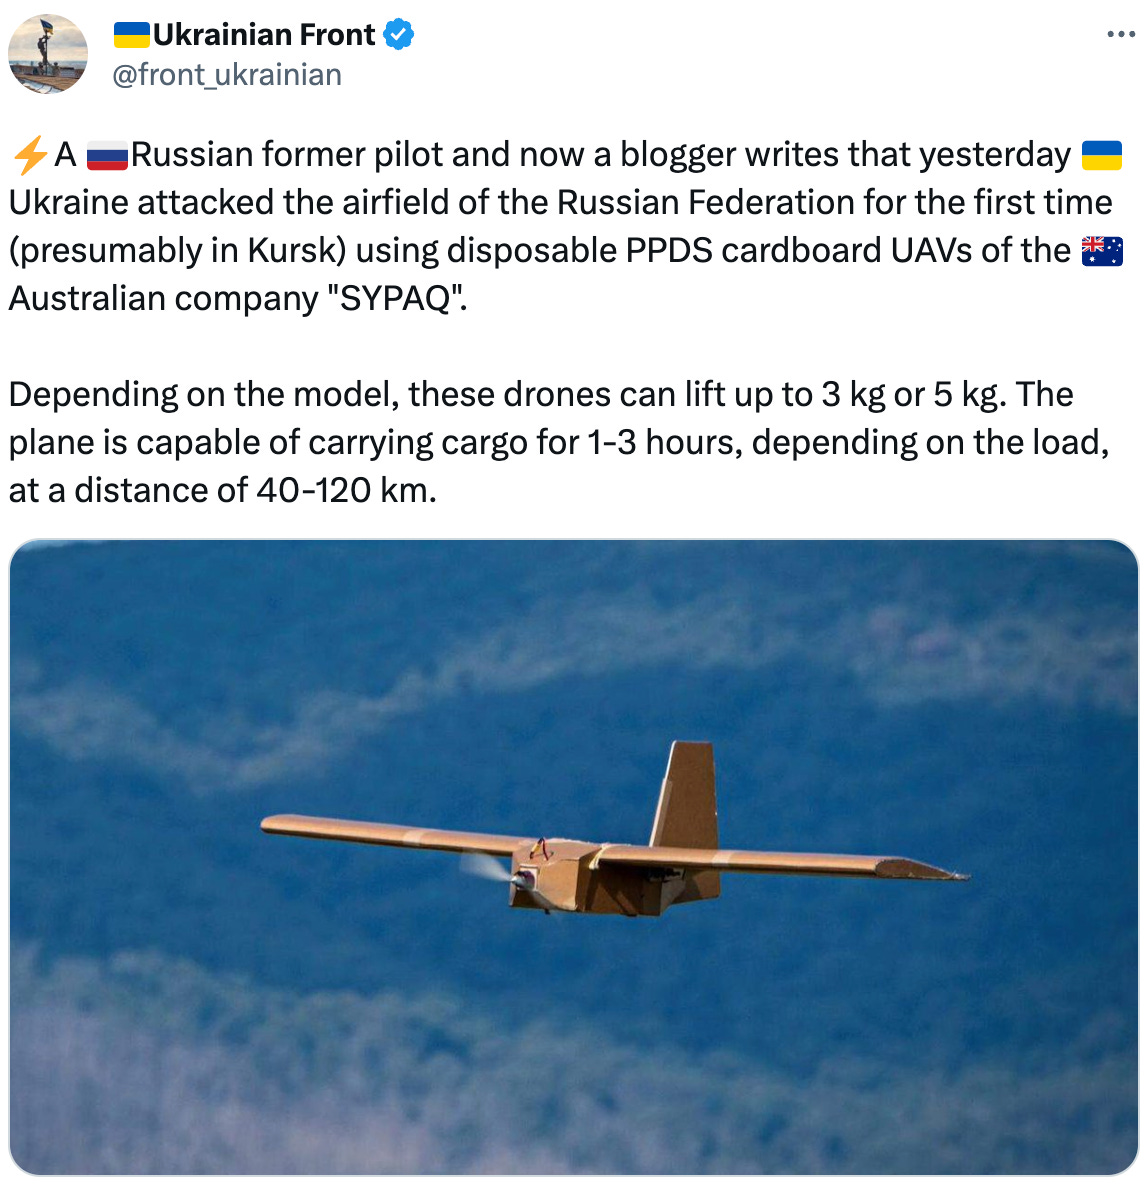  See new Tweets Conversation 🇺🇦Ukrainian Front @front_ukrainian ⚡️A 🇷🇺Russian former pilot and now a blogger writes that yesterday 🇺🇦Ukraine attacked the airfield of the Russian Federation for the first time (presumably in Kursk) using disposable PPDS cardboard UAVs of the 🇦🇺Australian company "SYPAQ".  Depending on the model, these drones can lift up to 3 kg or 5 kg. The plane is capable of carrying cargo for 1-3 hours, depending on the load, at a distance of 40-120 km.